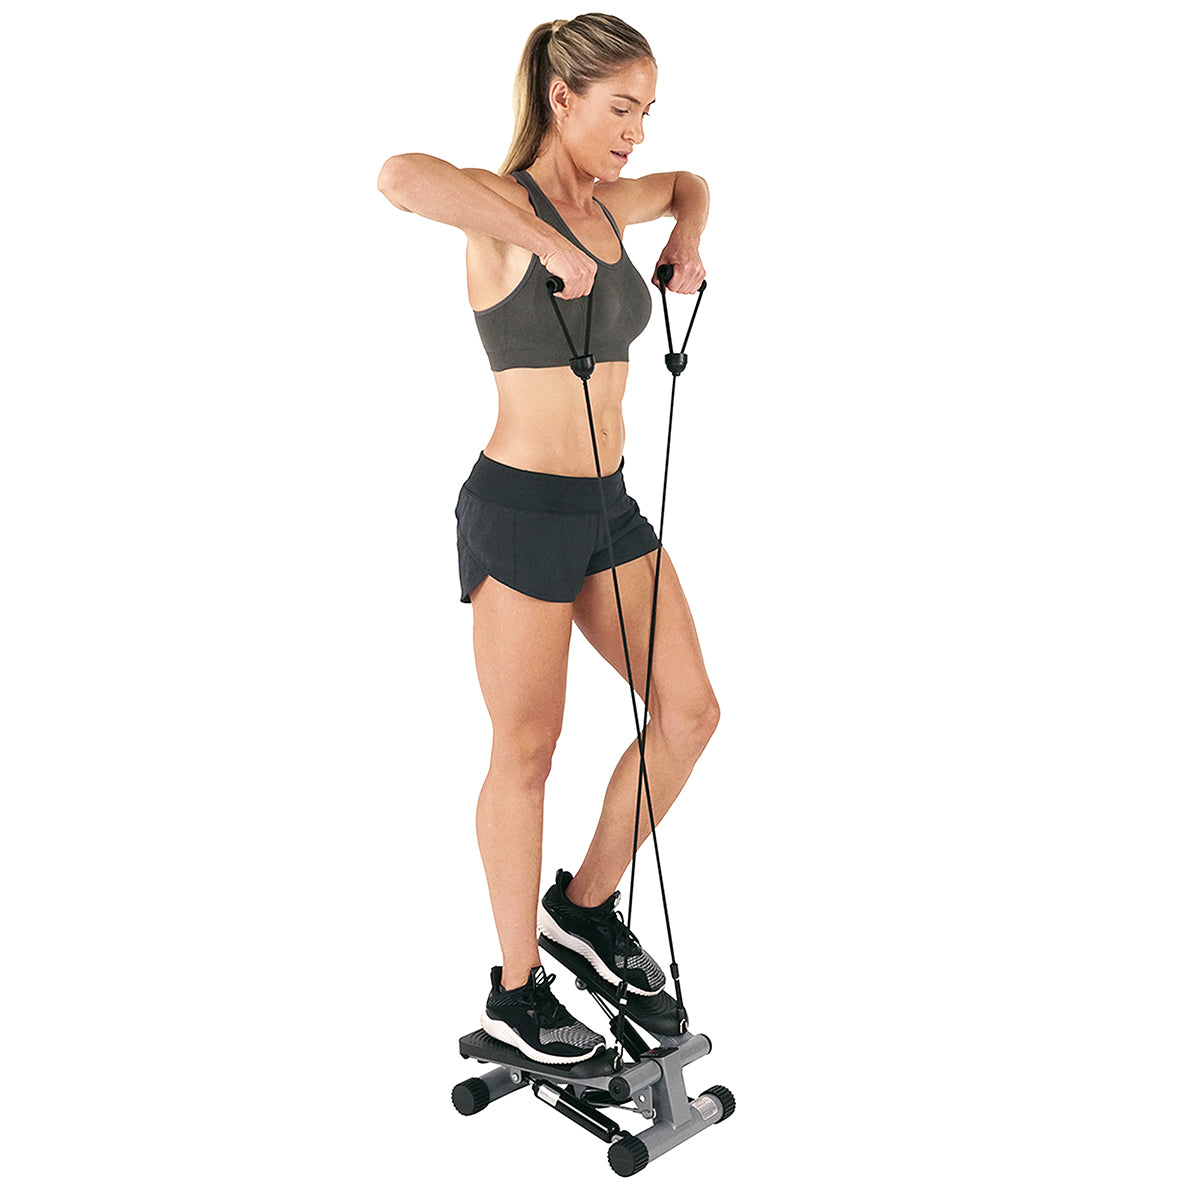 Sunny Health & Fitness Stepper Keeps Me Active at Home